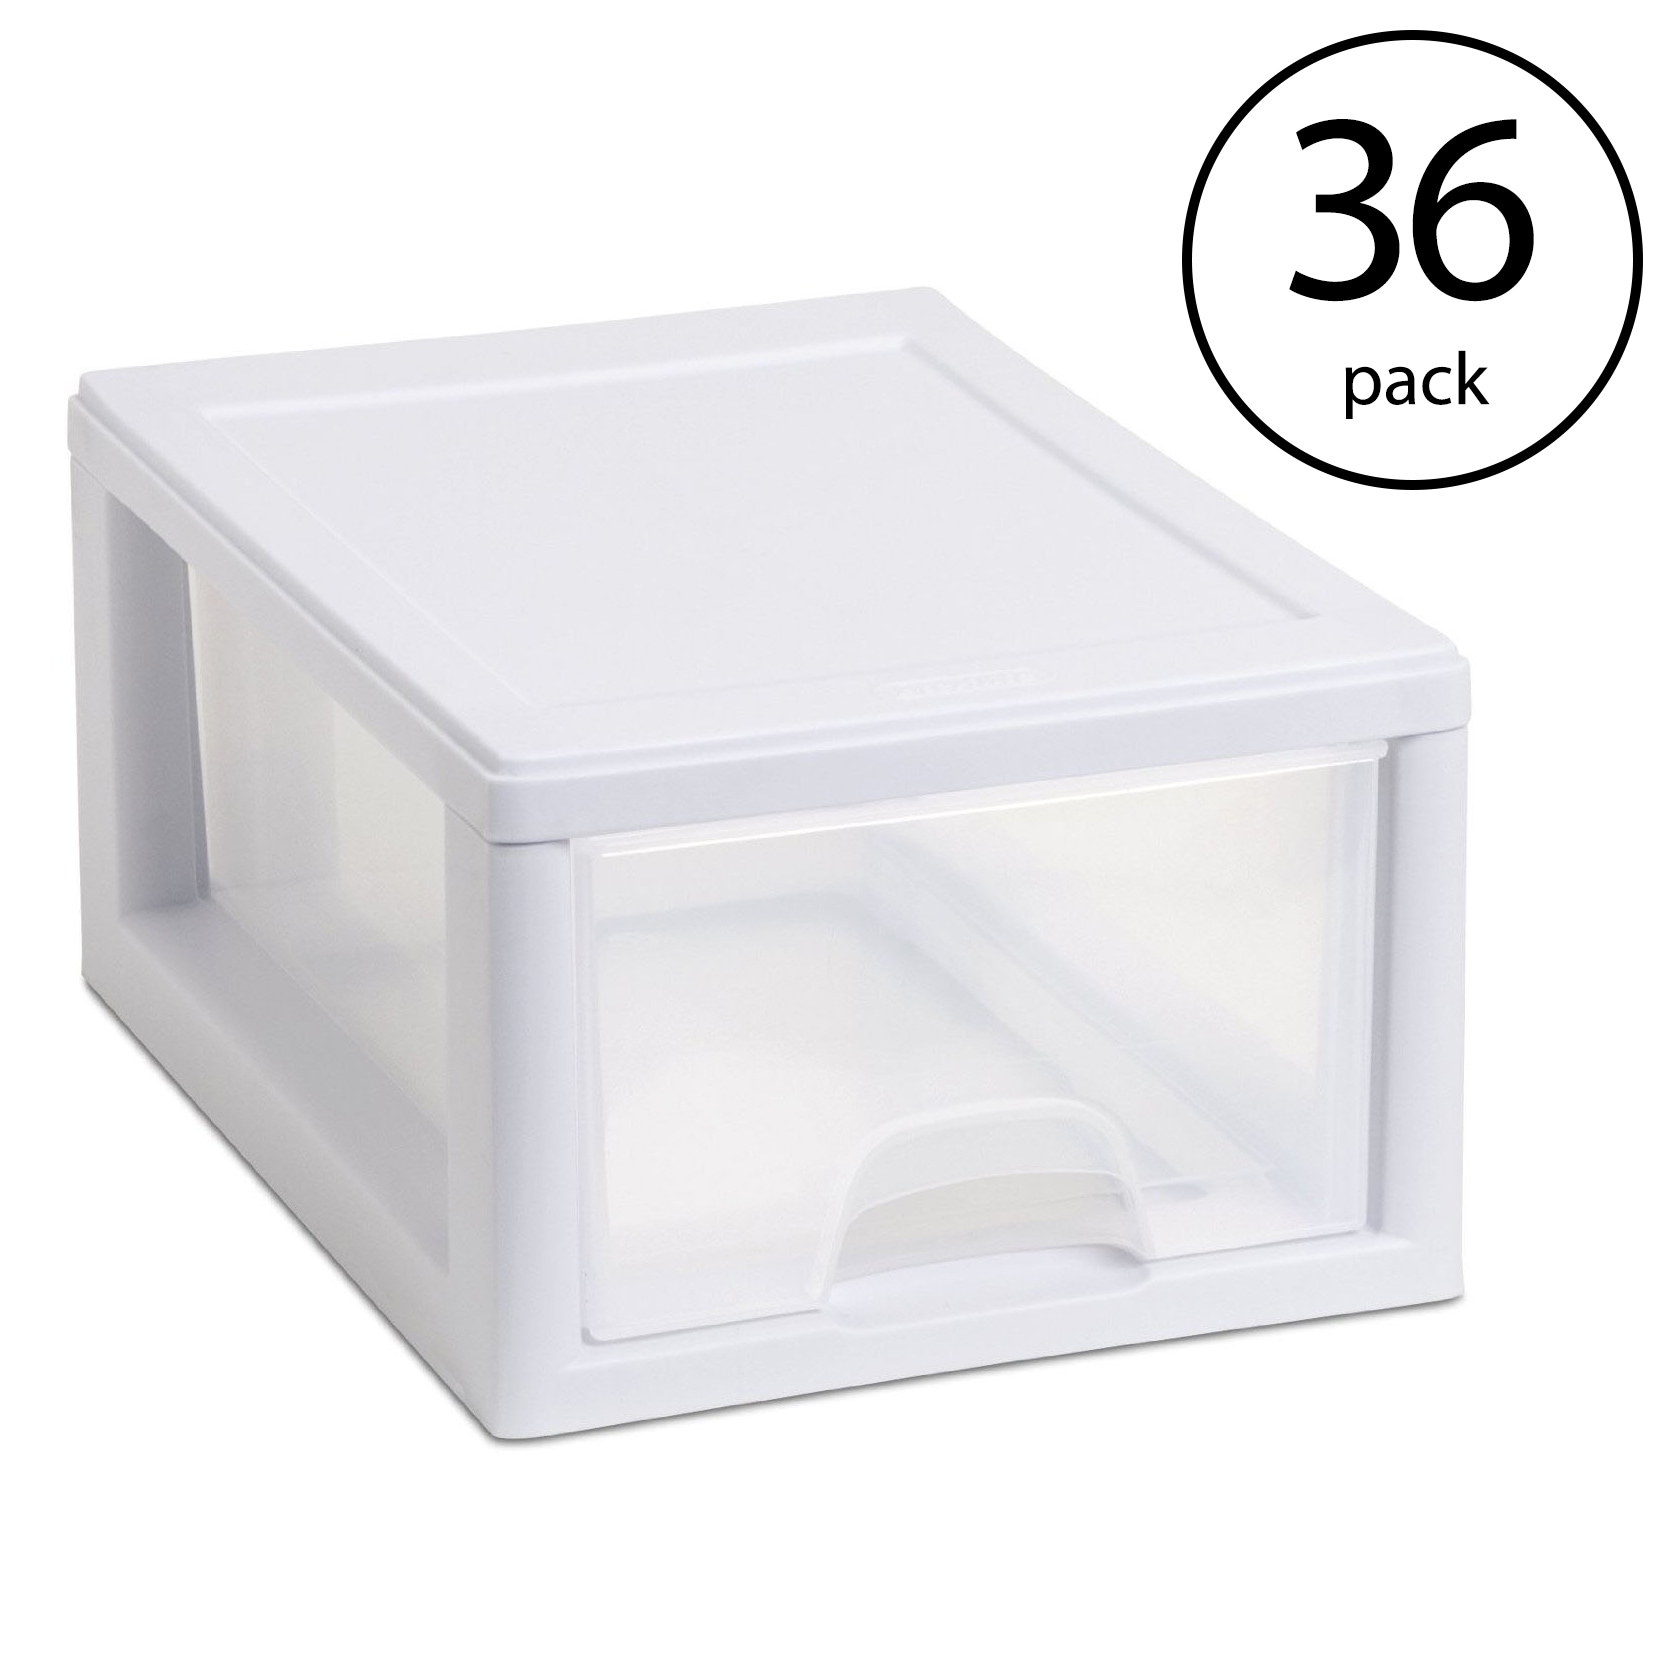 Sterilite 20518006 Stackable Small Drawer White Frame & See-Through (36  Pack)